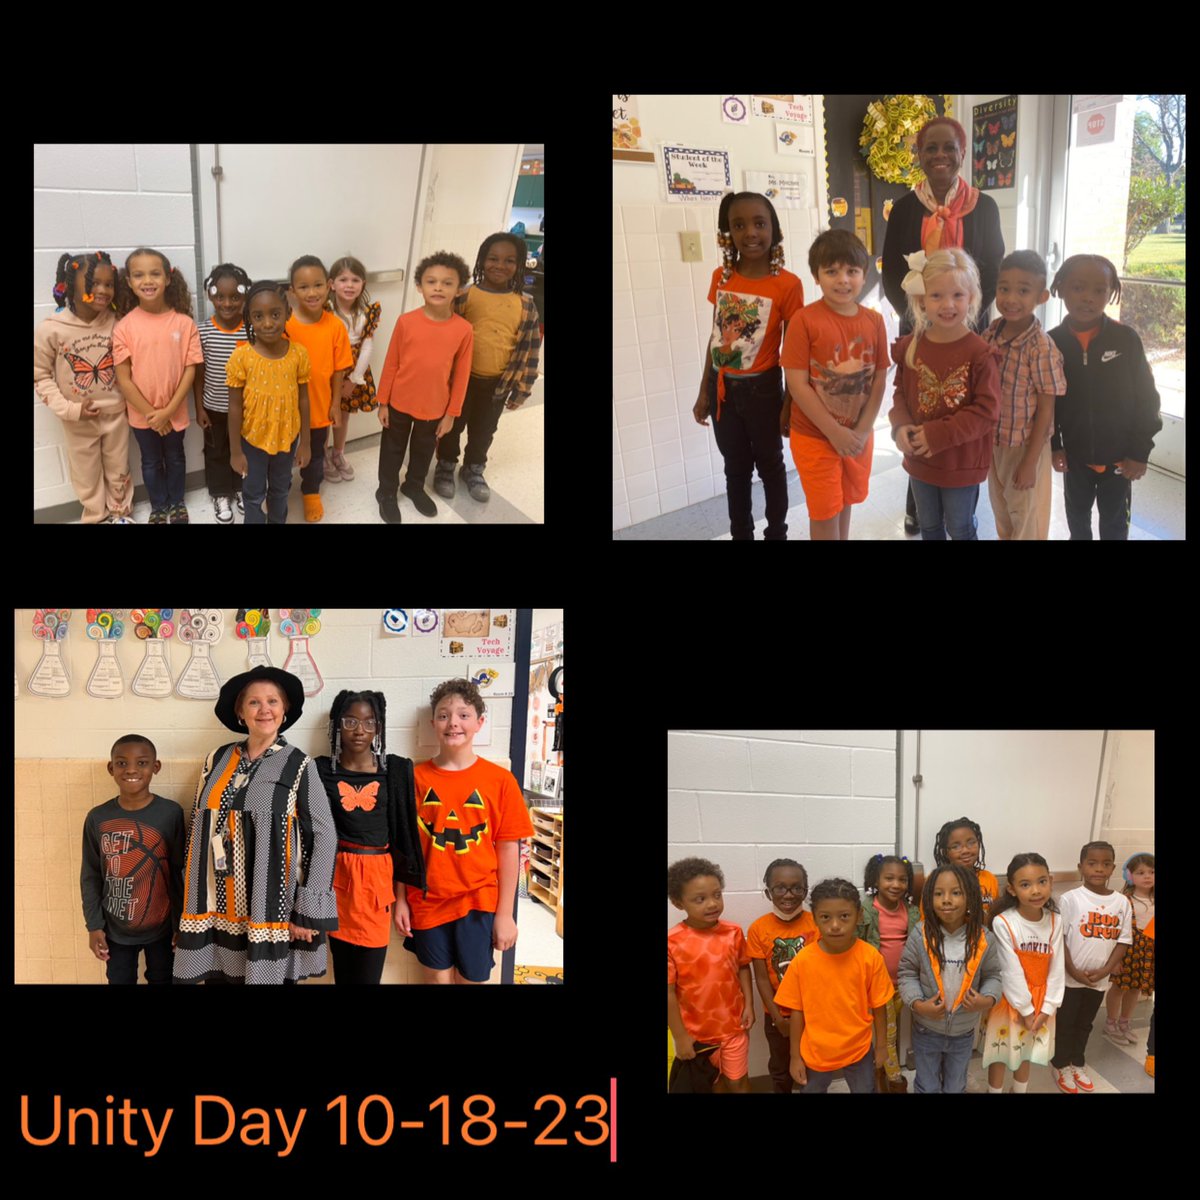 Our Little Bluejays know to “STOP the Bully & REPORT it FULLY”💛💙🧡@WESBluejays has NO Tolerance for Bullies #PPSshines #UnityDay2023 @Brenda21580279 @trac_lyn @Sand120513 @bigred4490 @LadyKarenT @cardellpatillo @MelCouther @TinikaDawson @TonyaEa55288874 @wl2tch